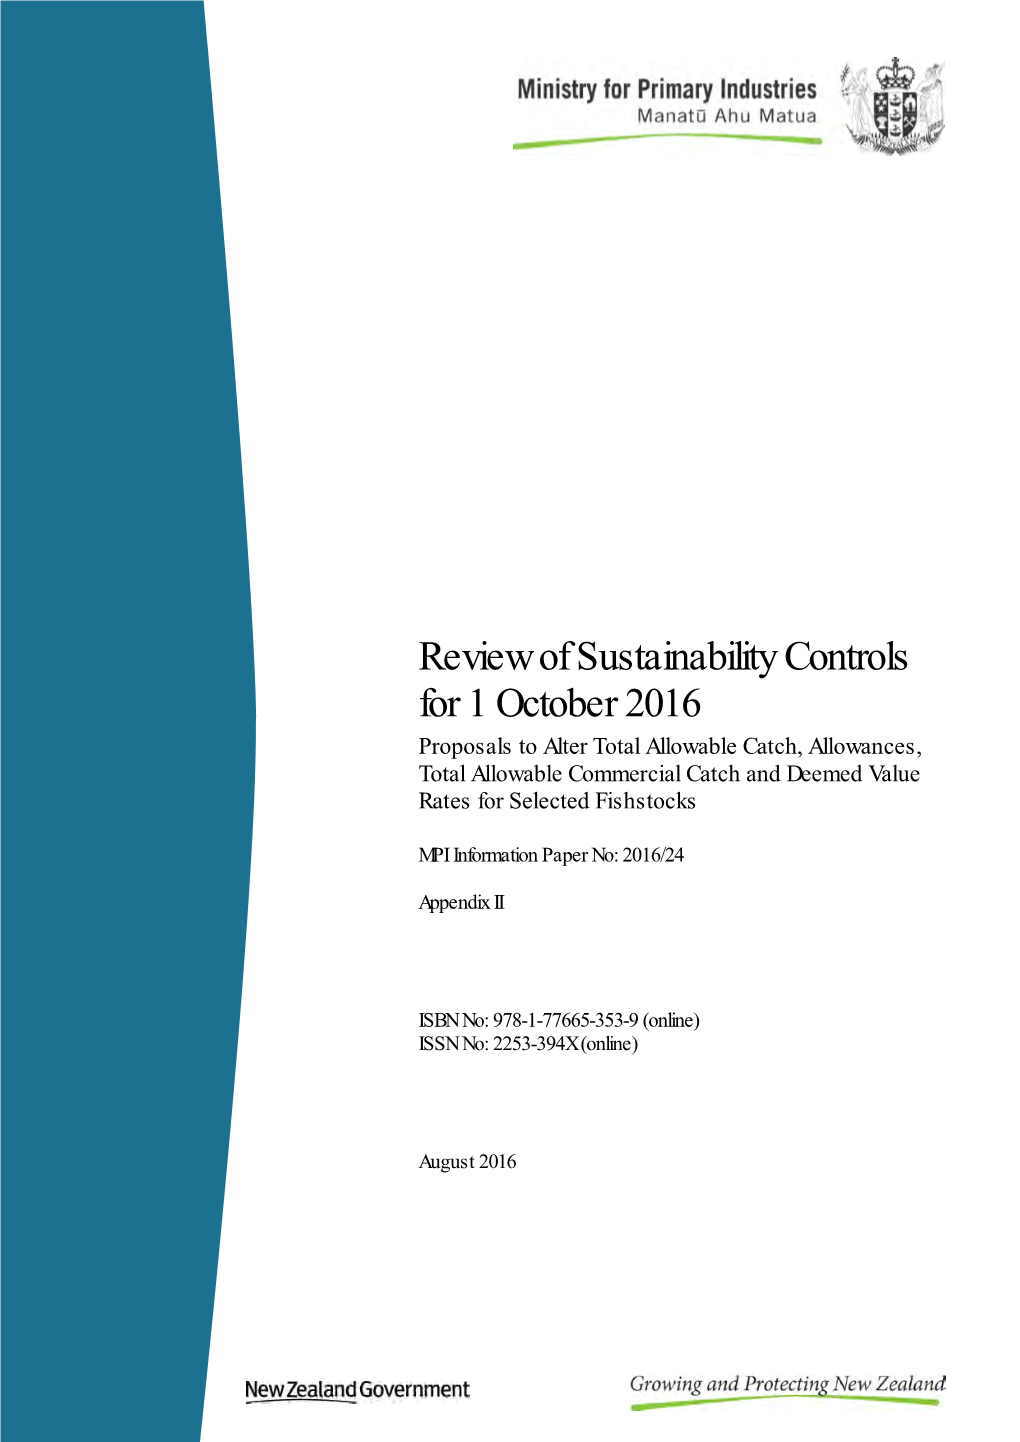 Review of Sustainability Controls for 1 October 2016